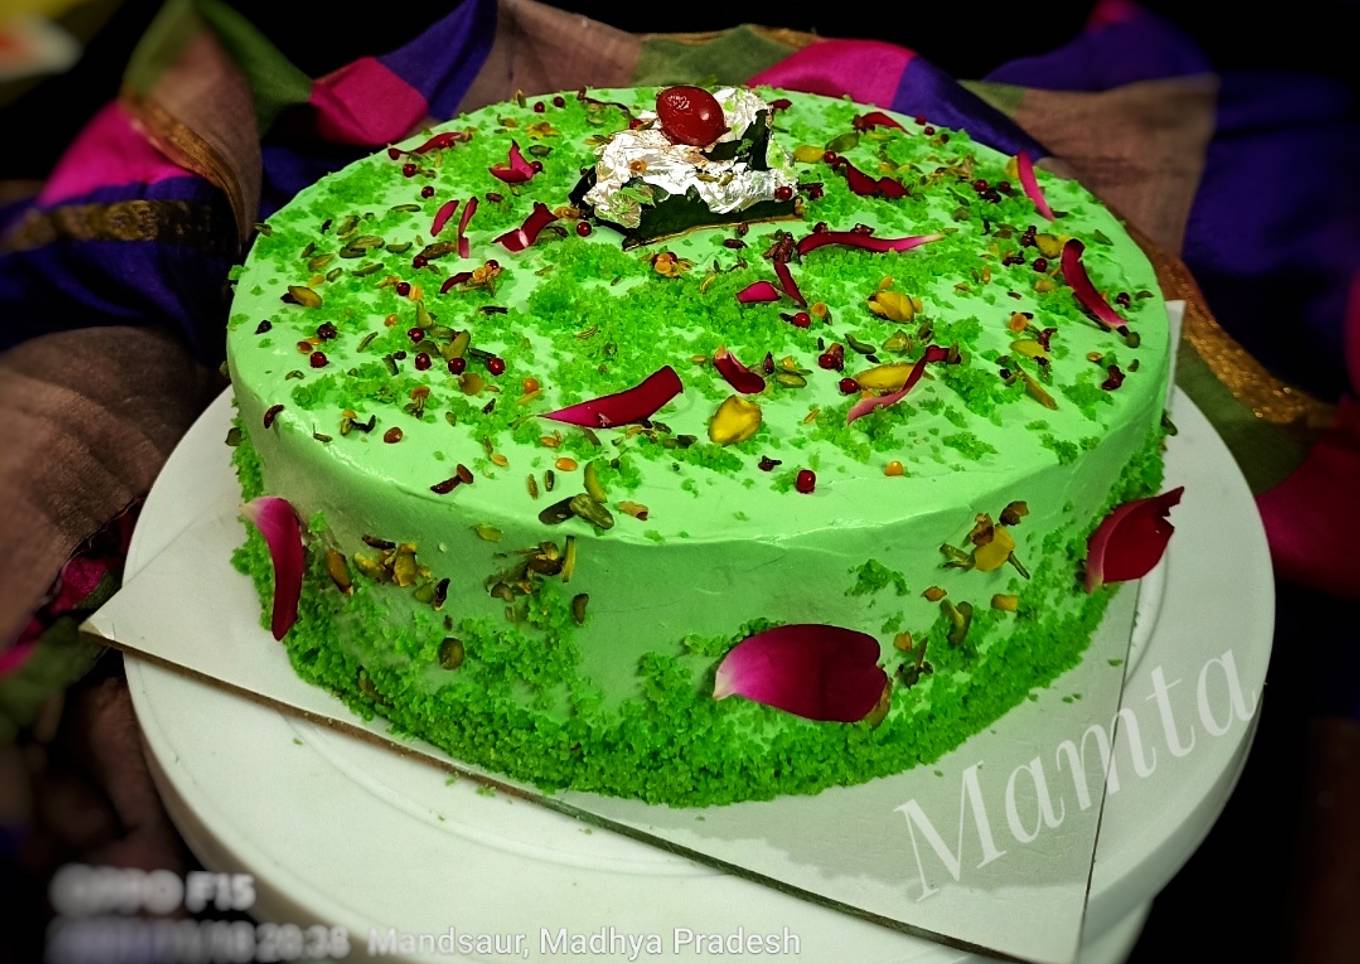 Paan flavored Cake